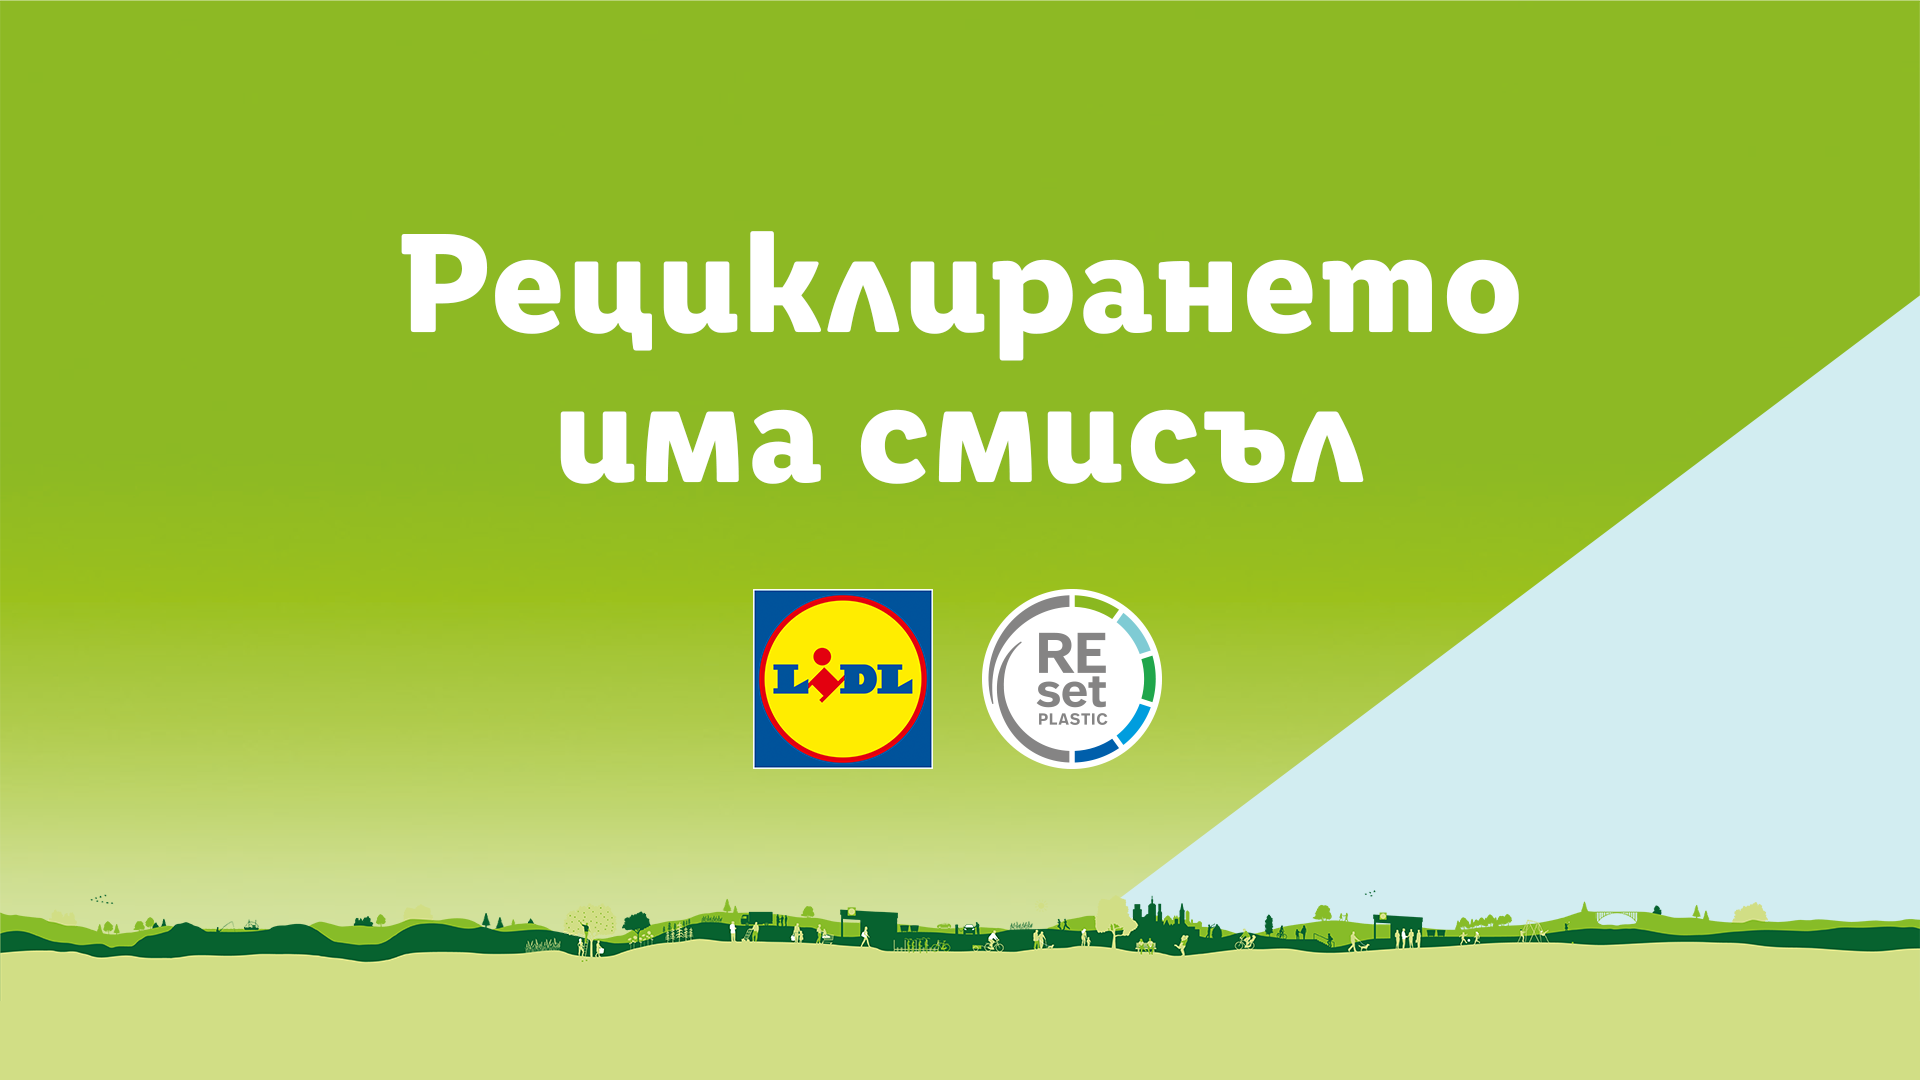 LIDL Bulgaria launches campaign for recycling and plastic reduction